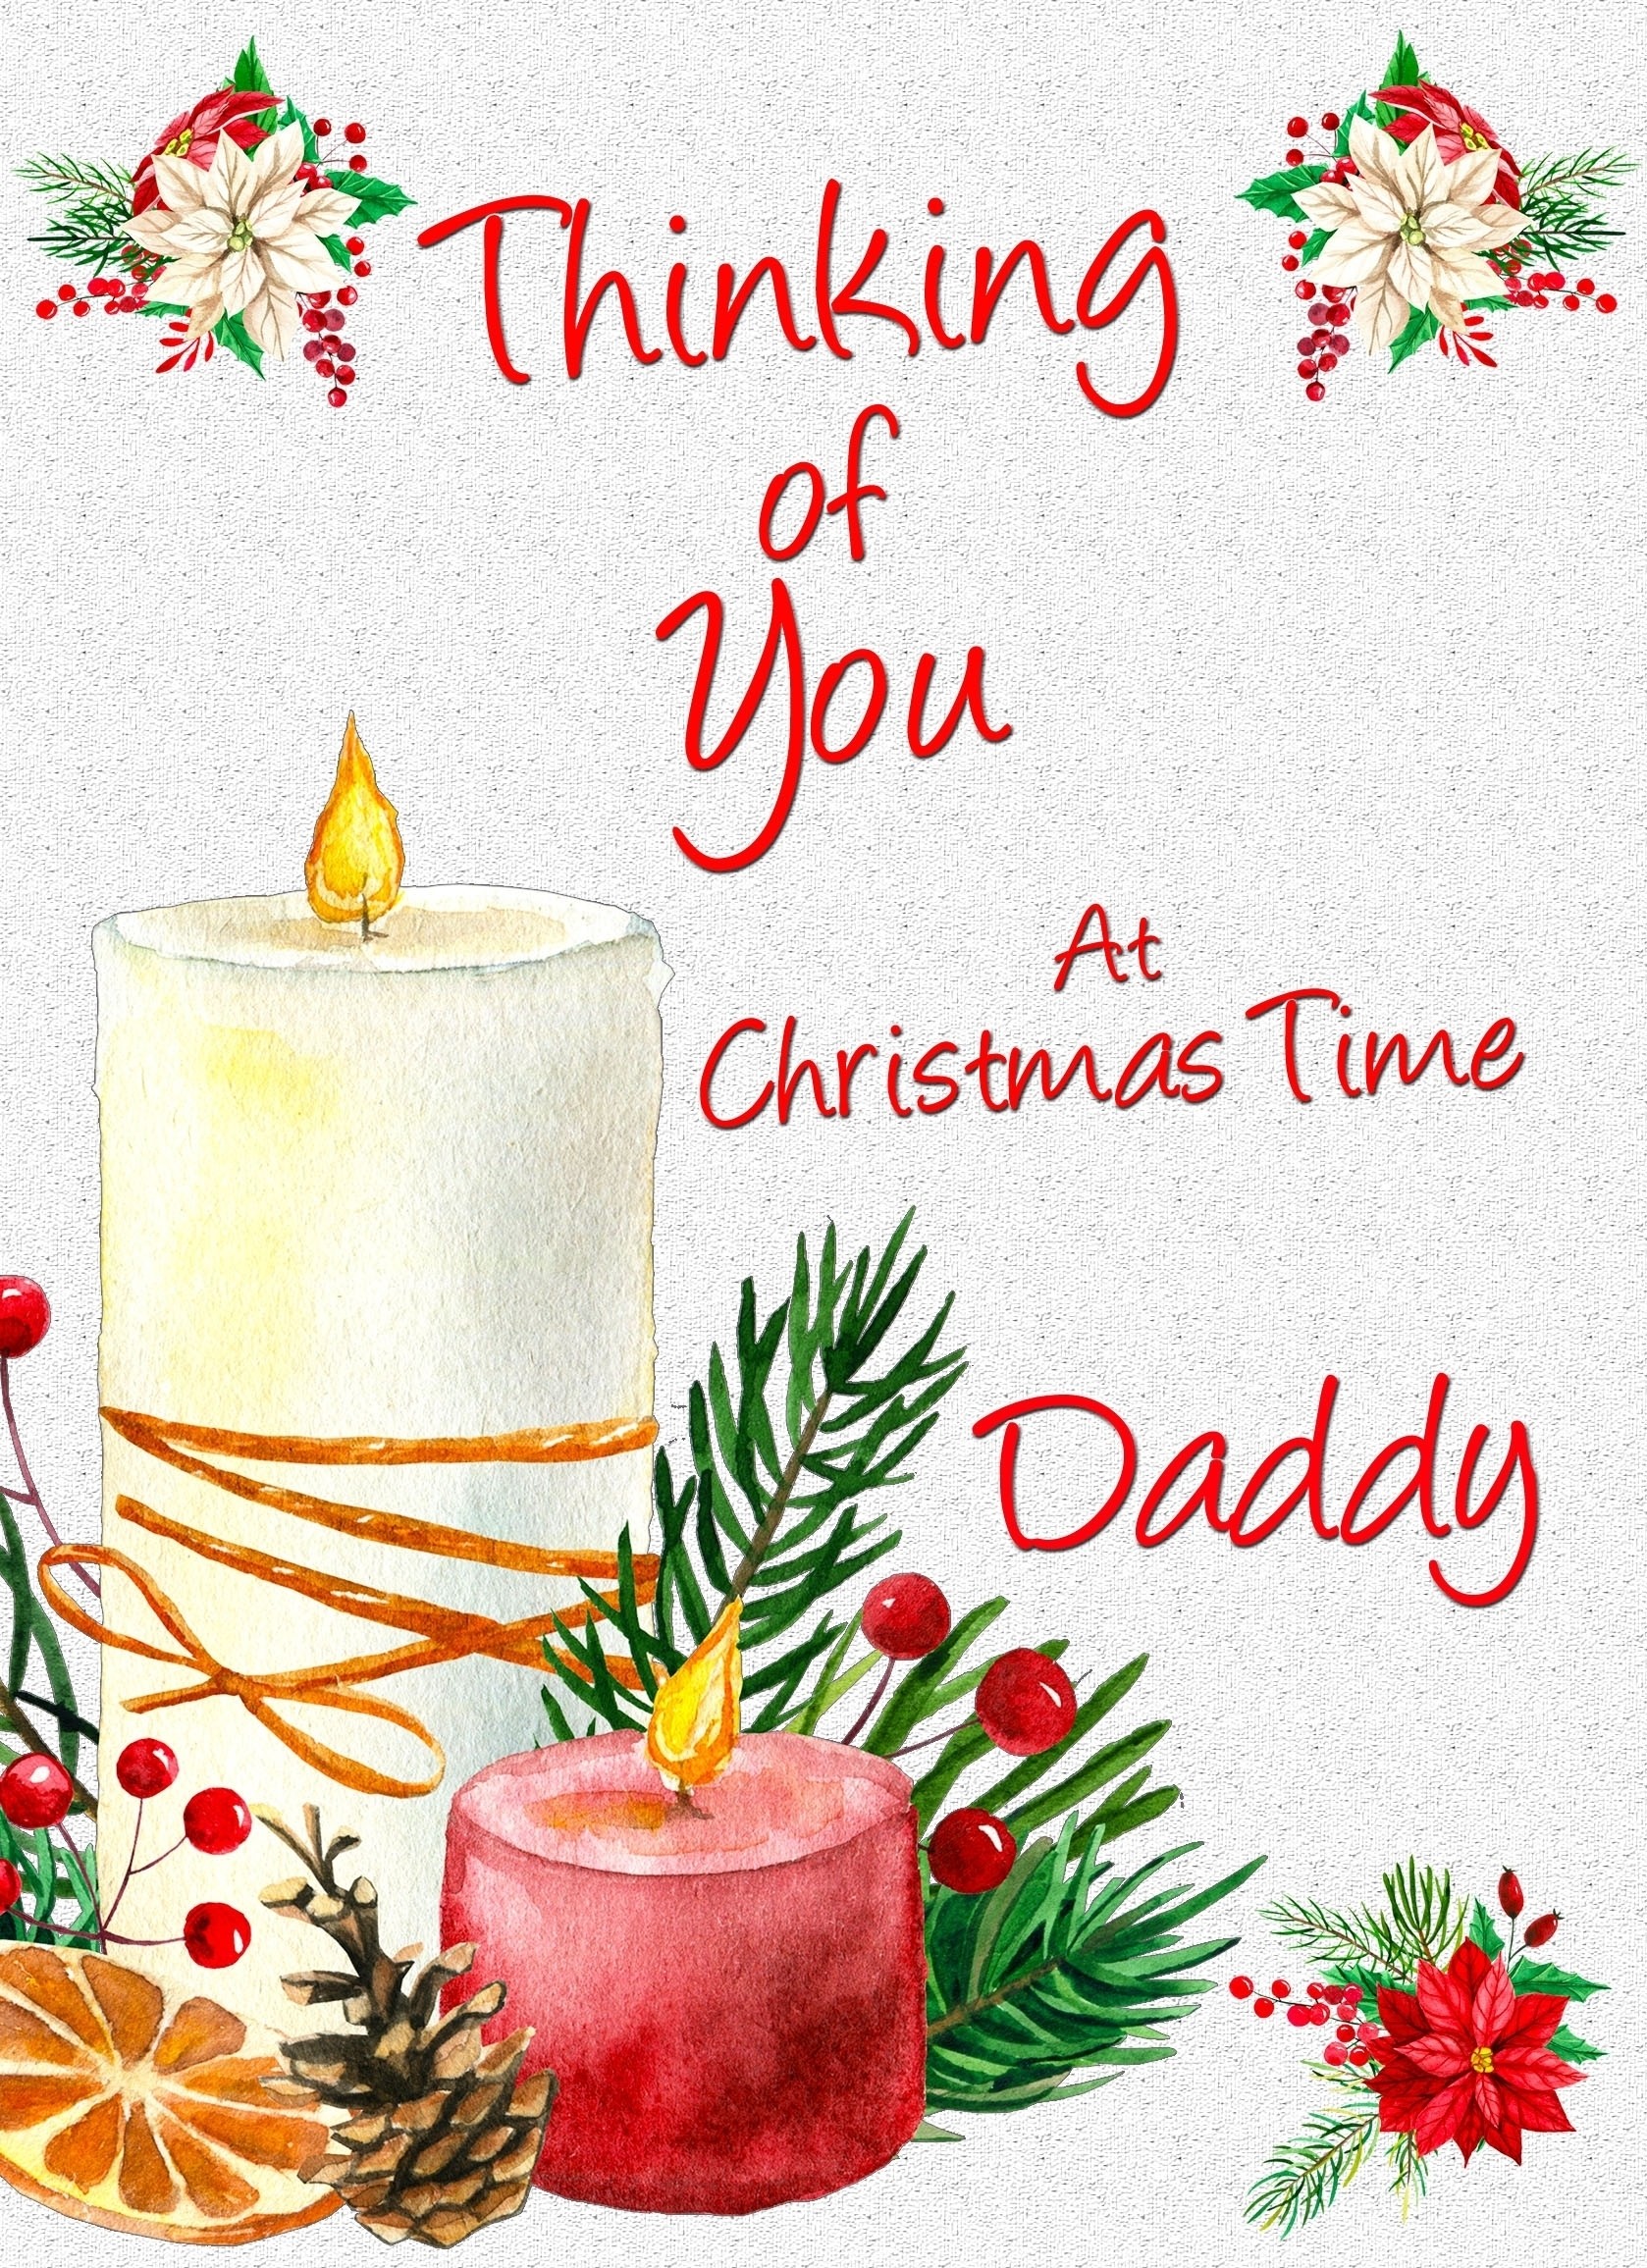 Thinking of You at Christmas Card For Daddy (Candle)